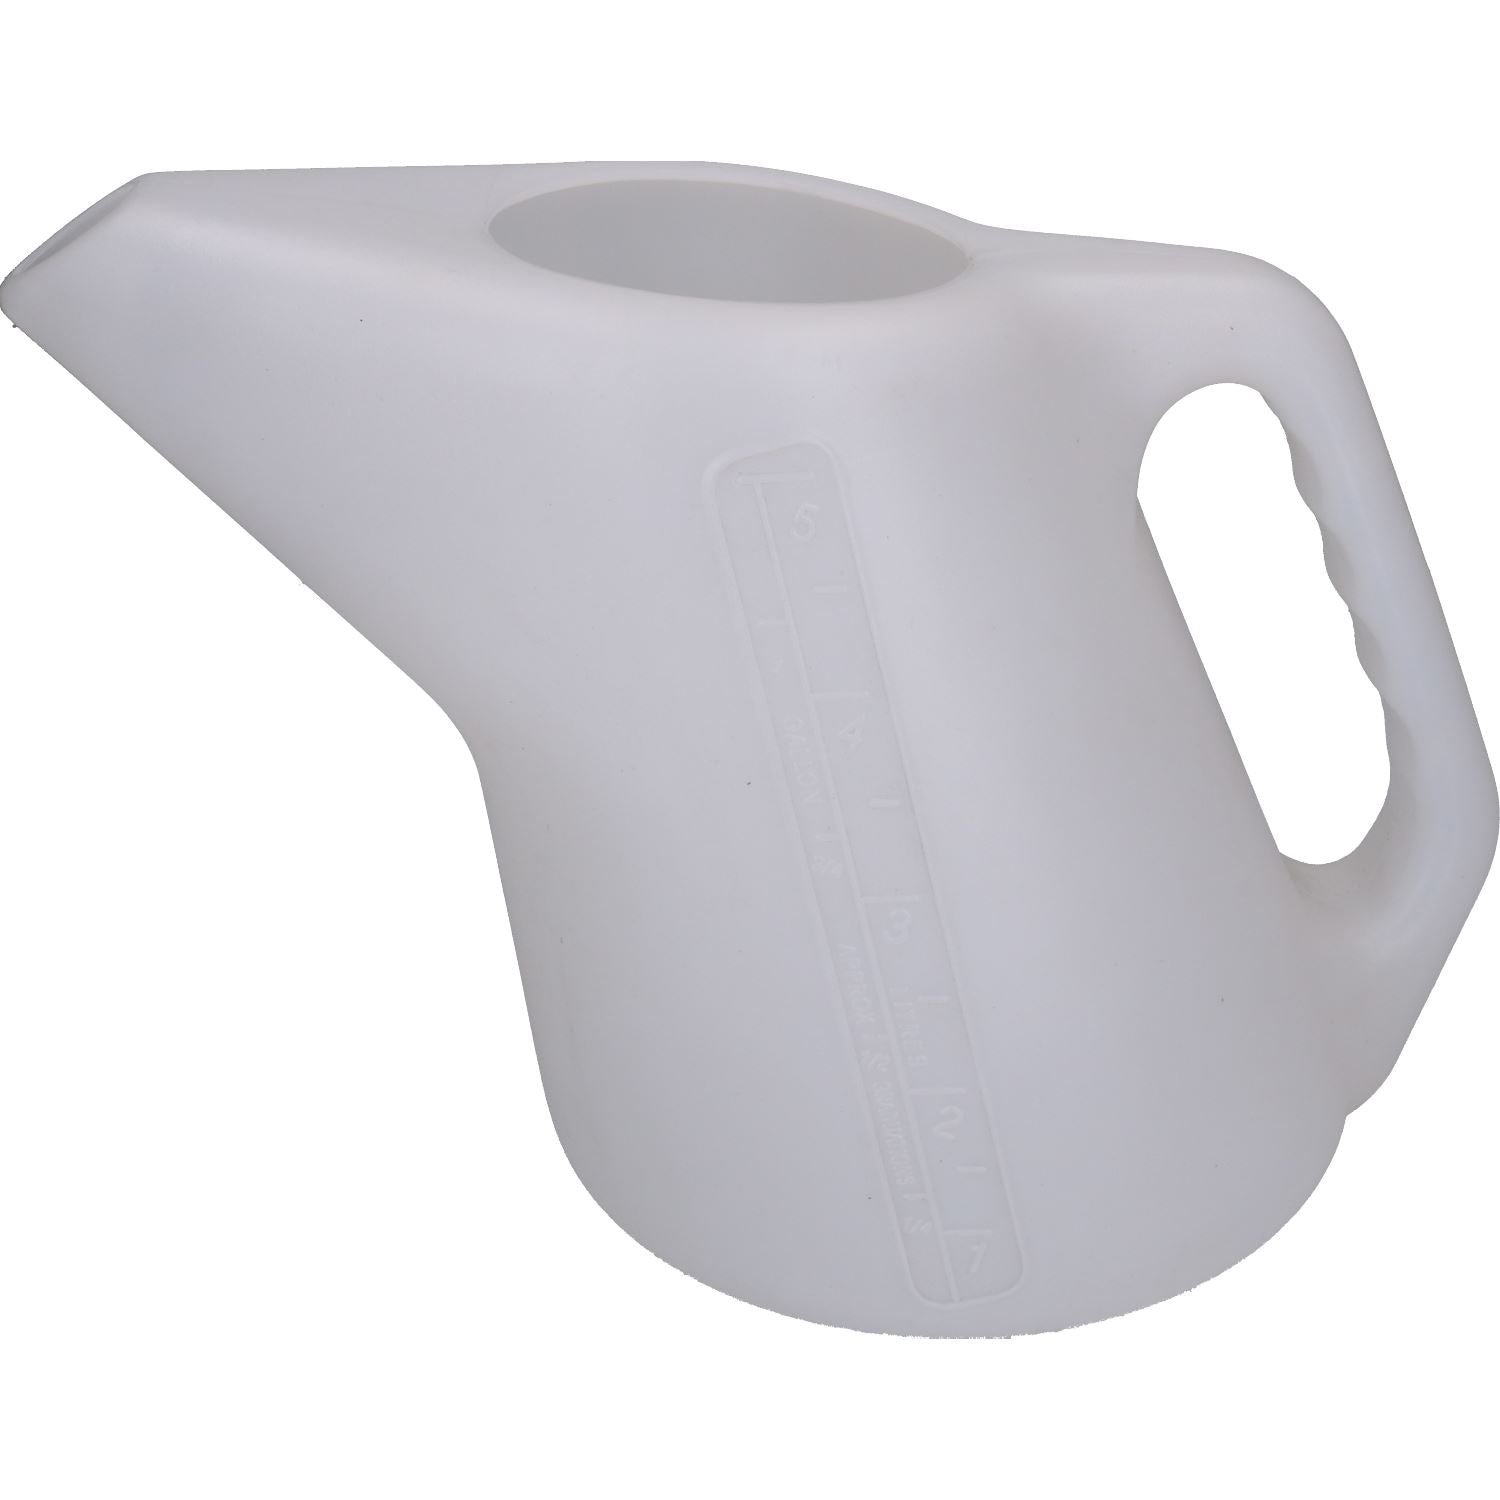 5L Litre Tapered Measuring Jug Pouring Spout For water Liquids Fuel Petrol Diesel